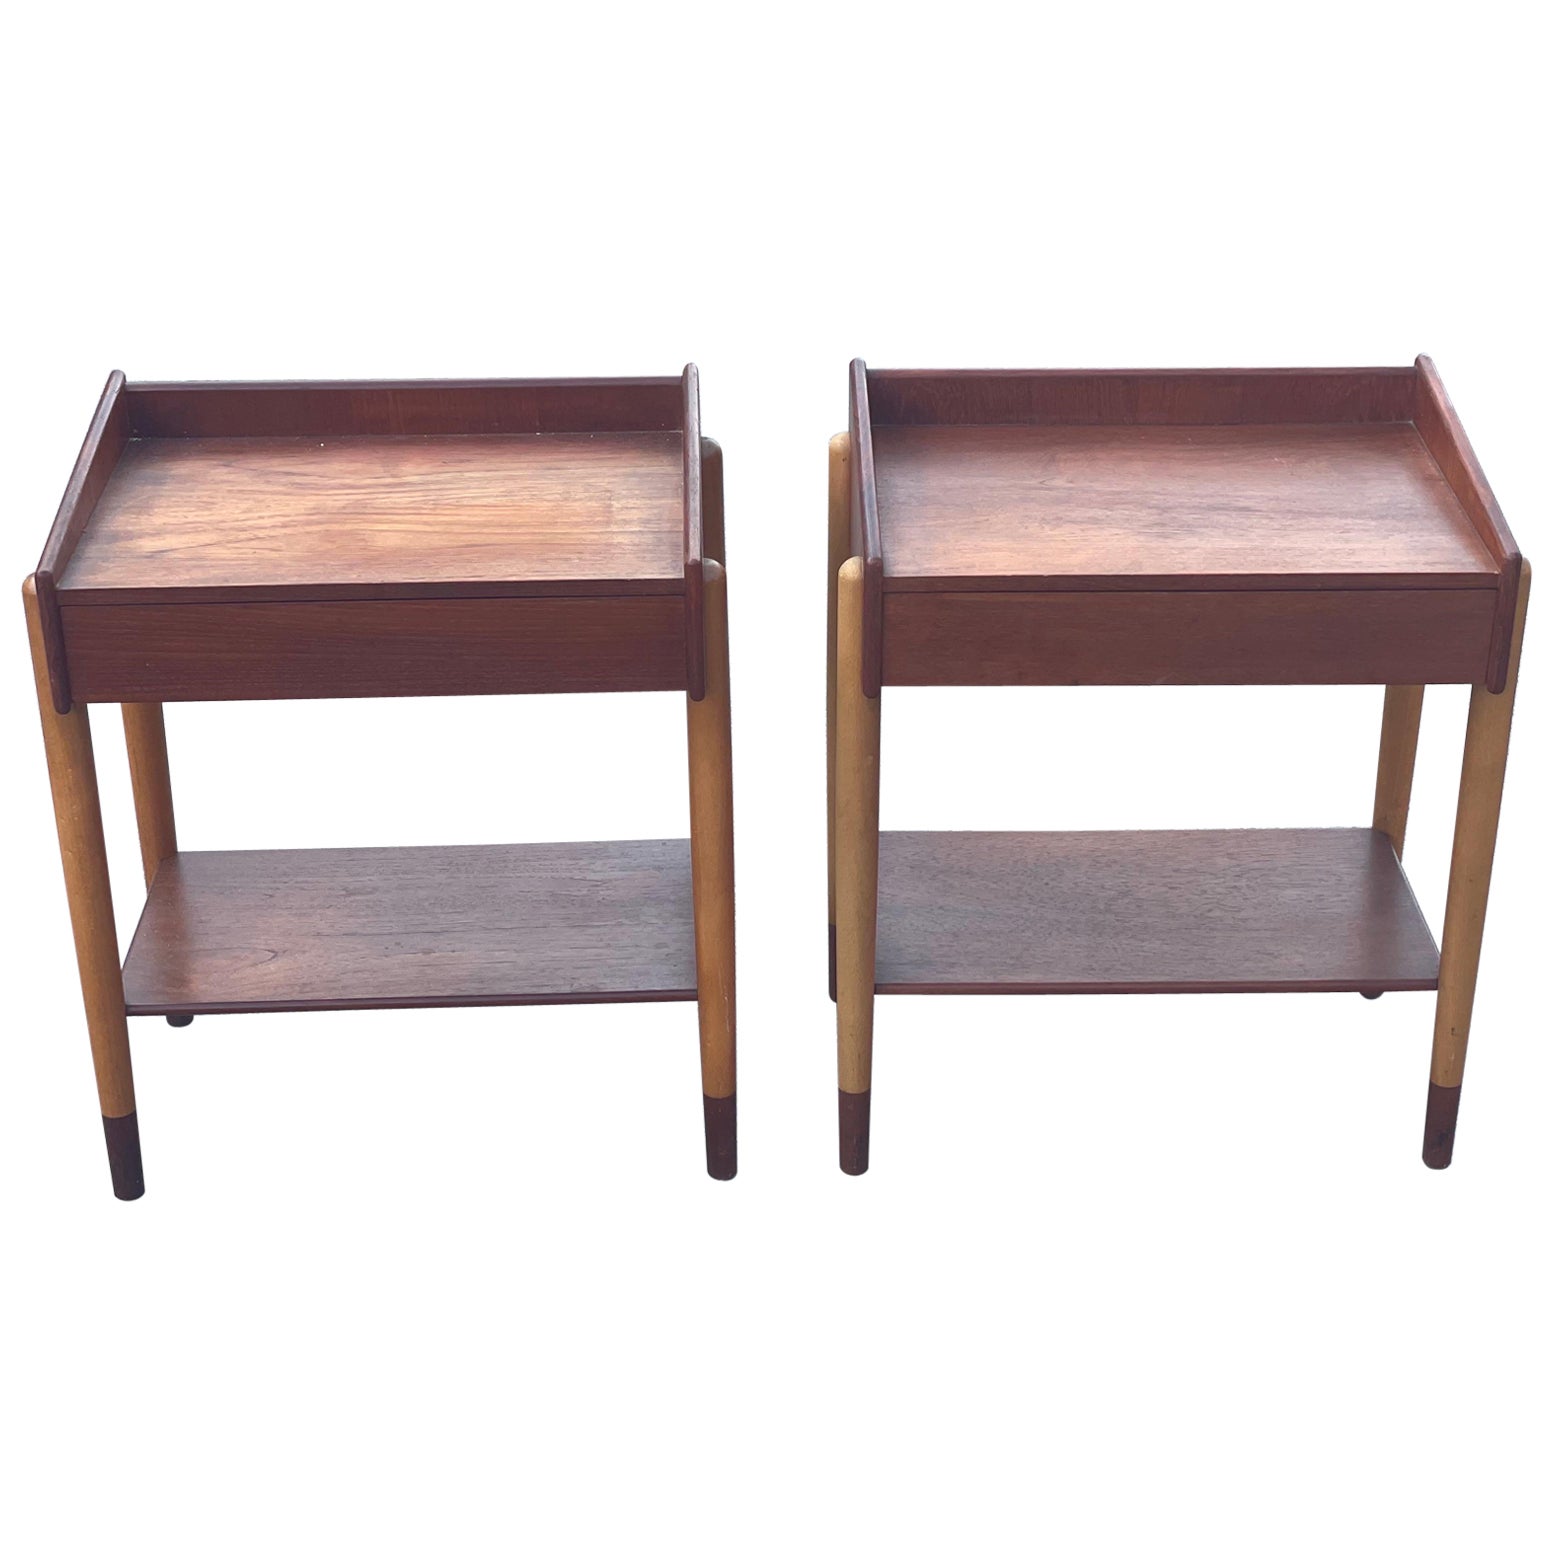 Discover the essence of Danish Mid-Century Modern design with this rare set of two bedside tables. Designed by Børge Mogensen in the 1950s, these tables showcase the beauty of teak wood and the craftsmanship of Søborg Møbler. With their Minimalist